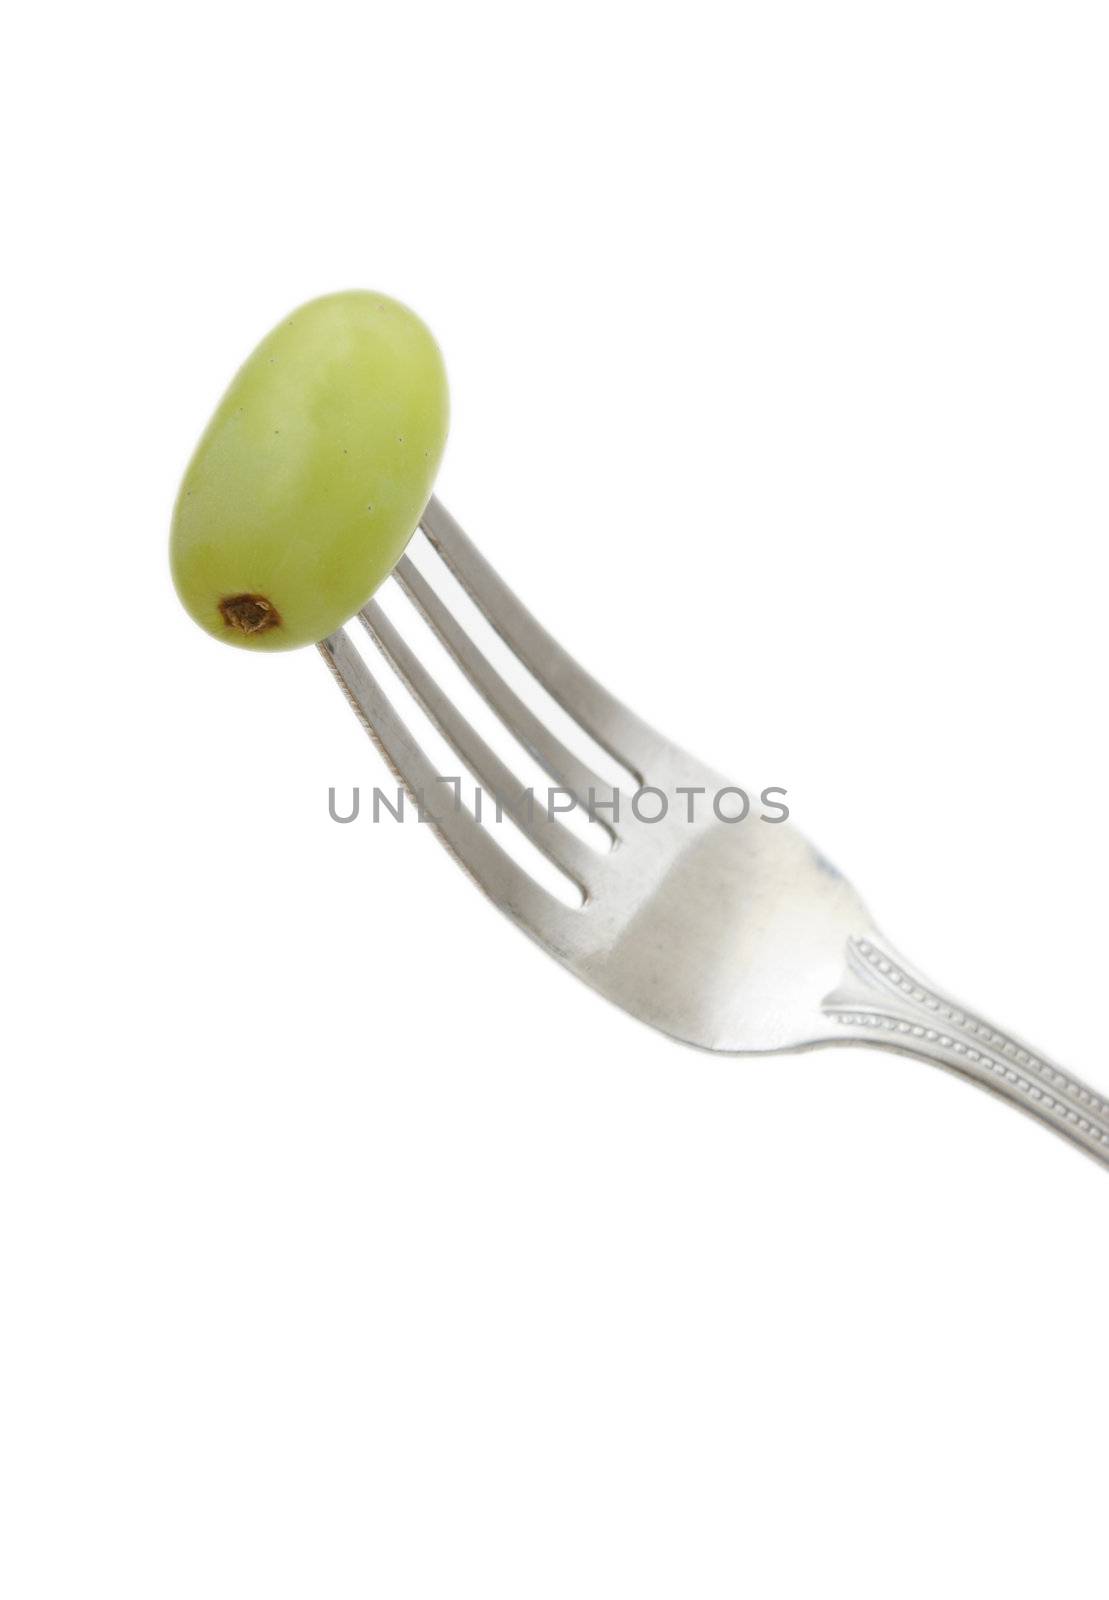 A fork with a grape on it to show healthy eating.